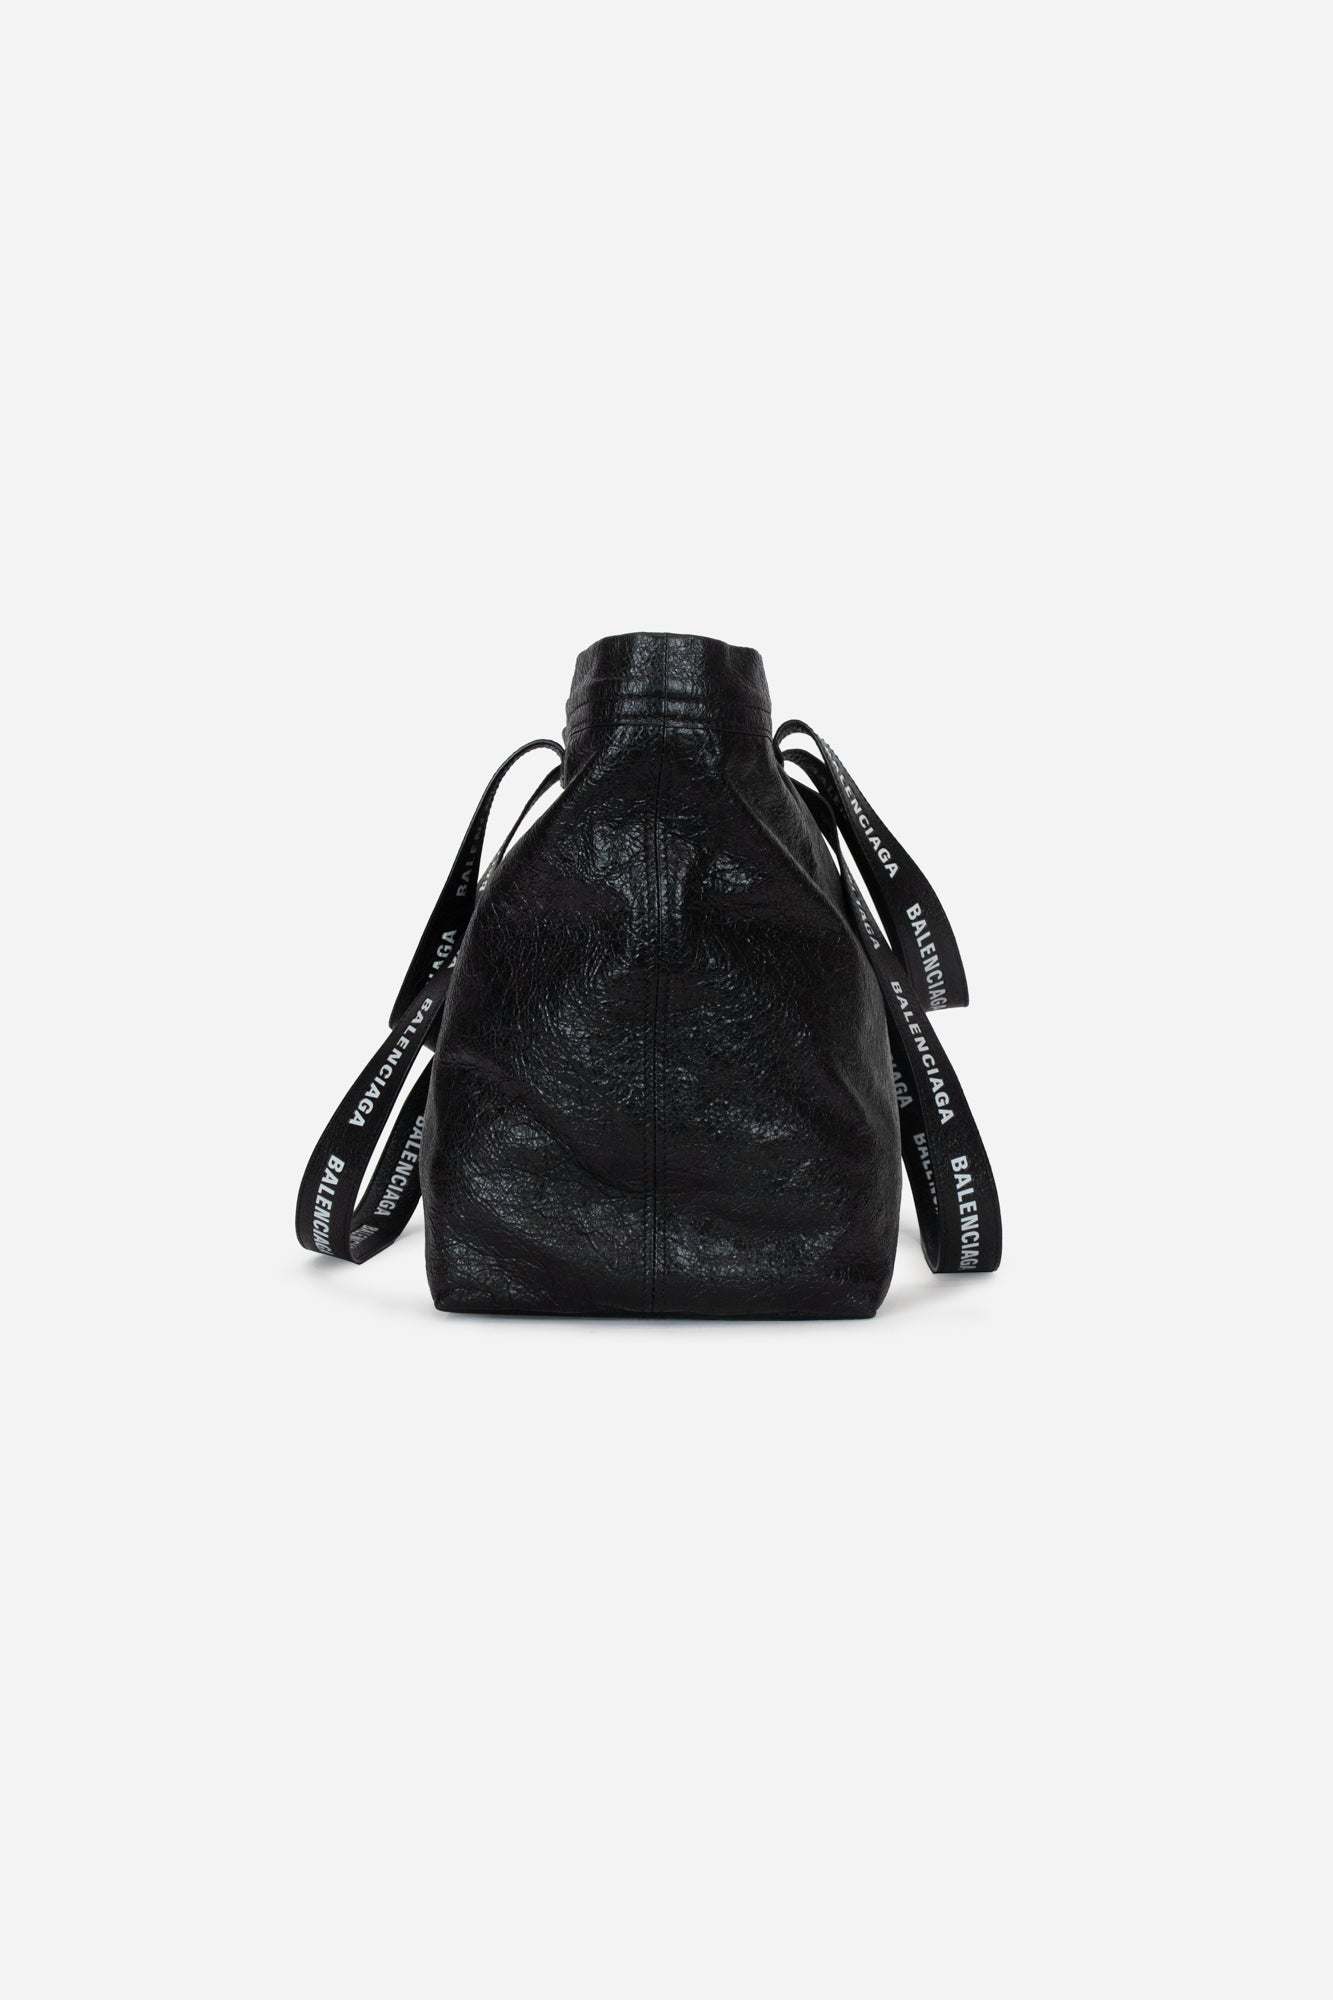 Black Double Strapped Tote With White Logo